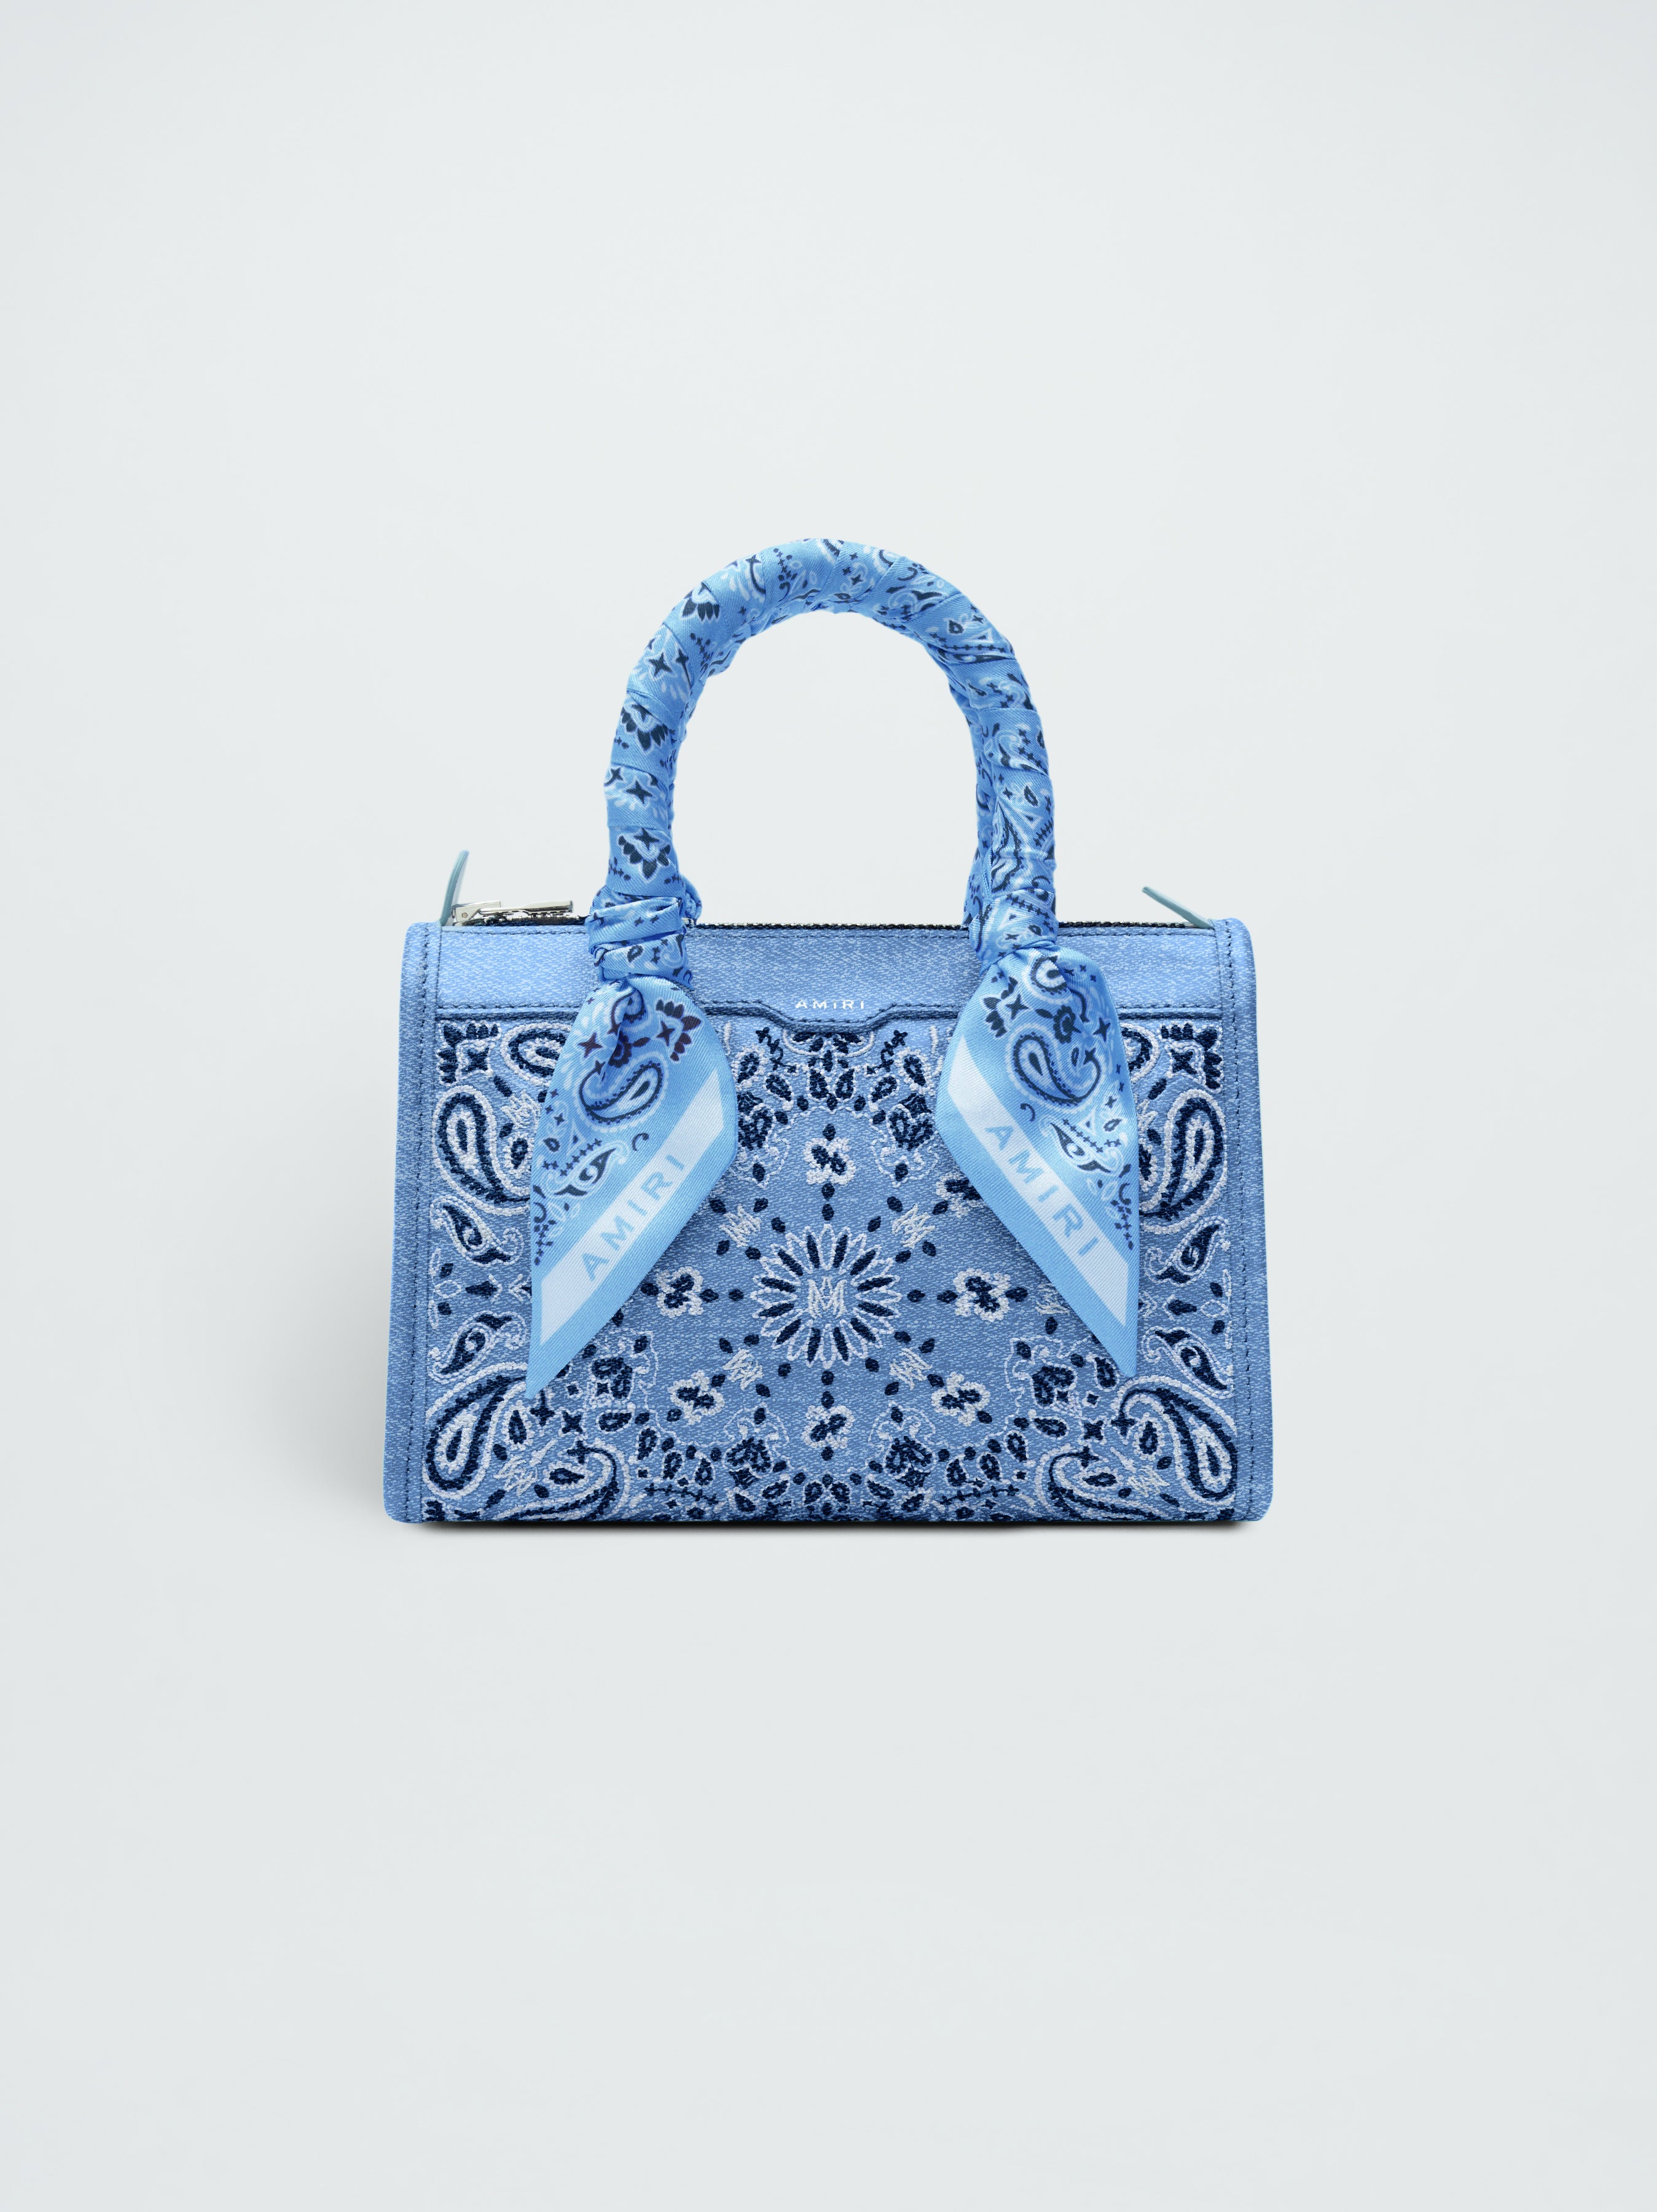 Product WOMEN - MICRO TRIANGLE BAG - NATURAL / DENIM featured image